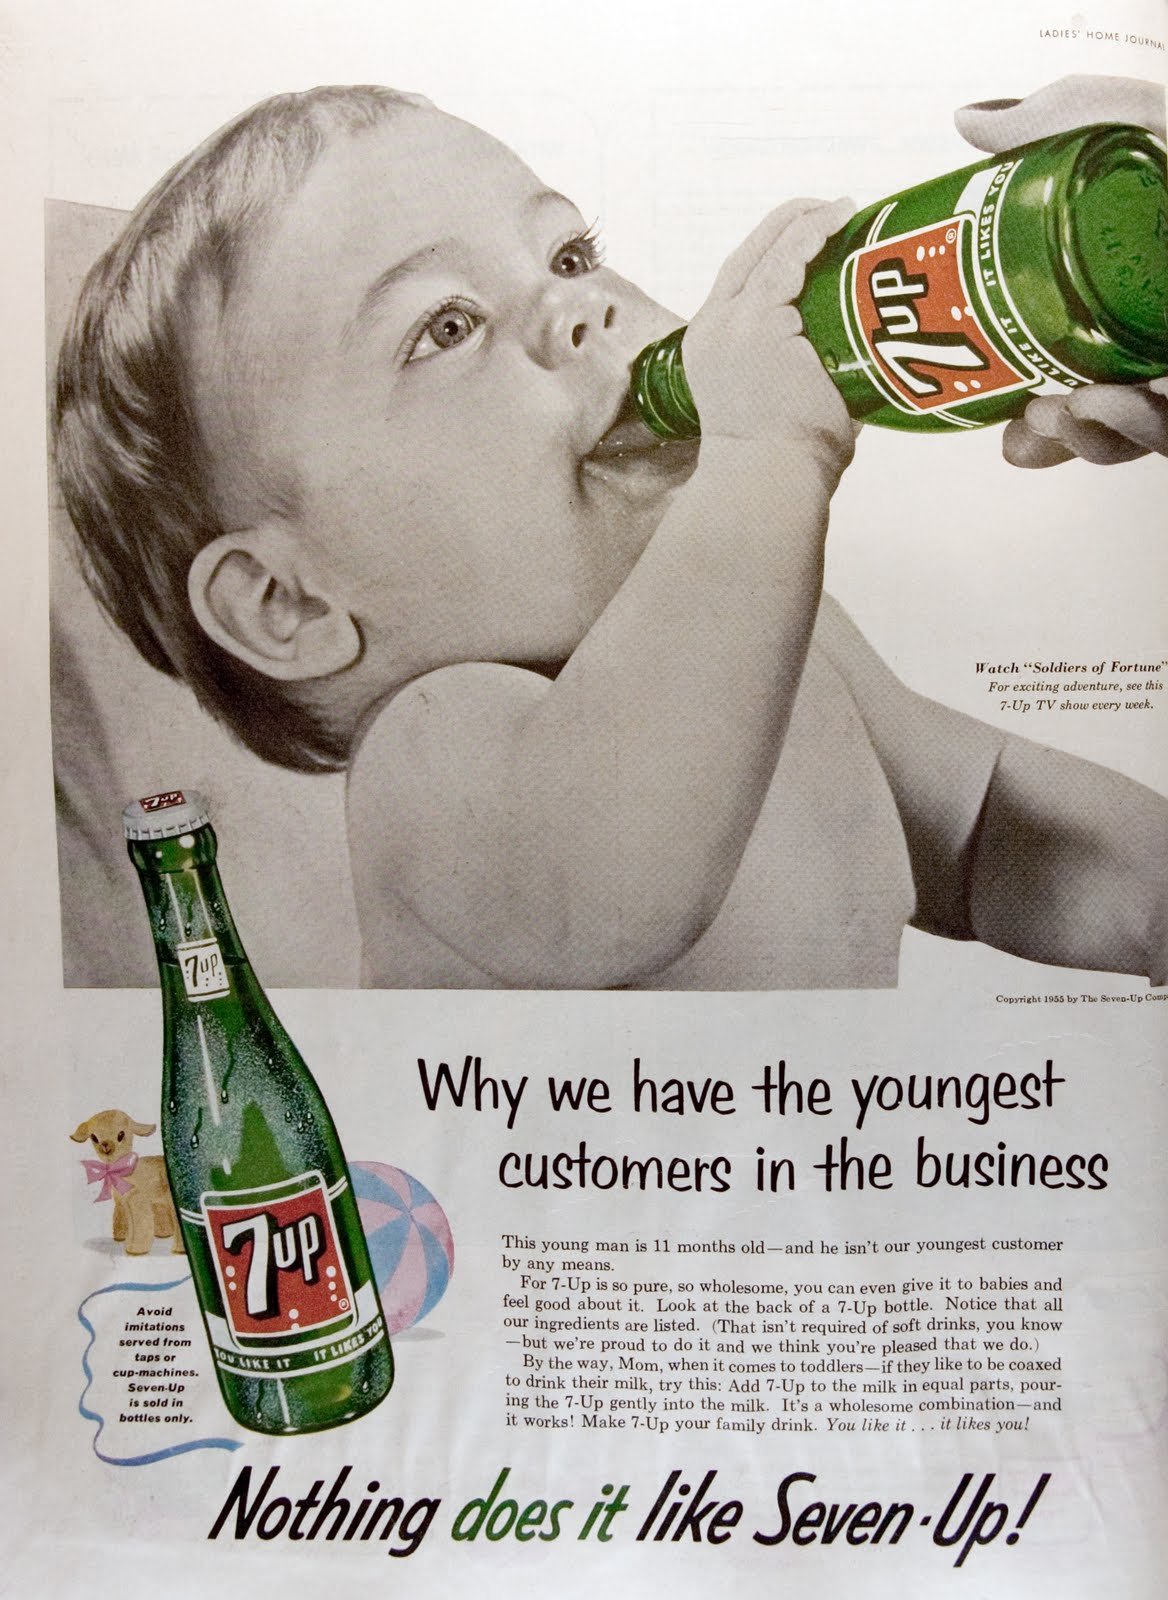 Babies Drinking 7-Up